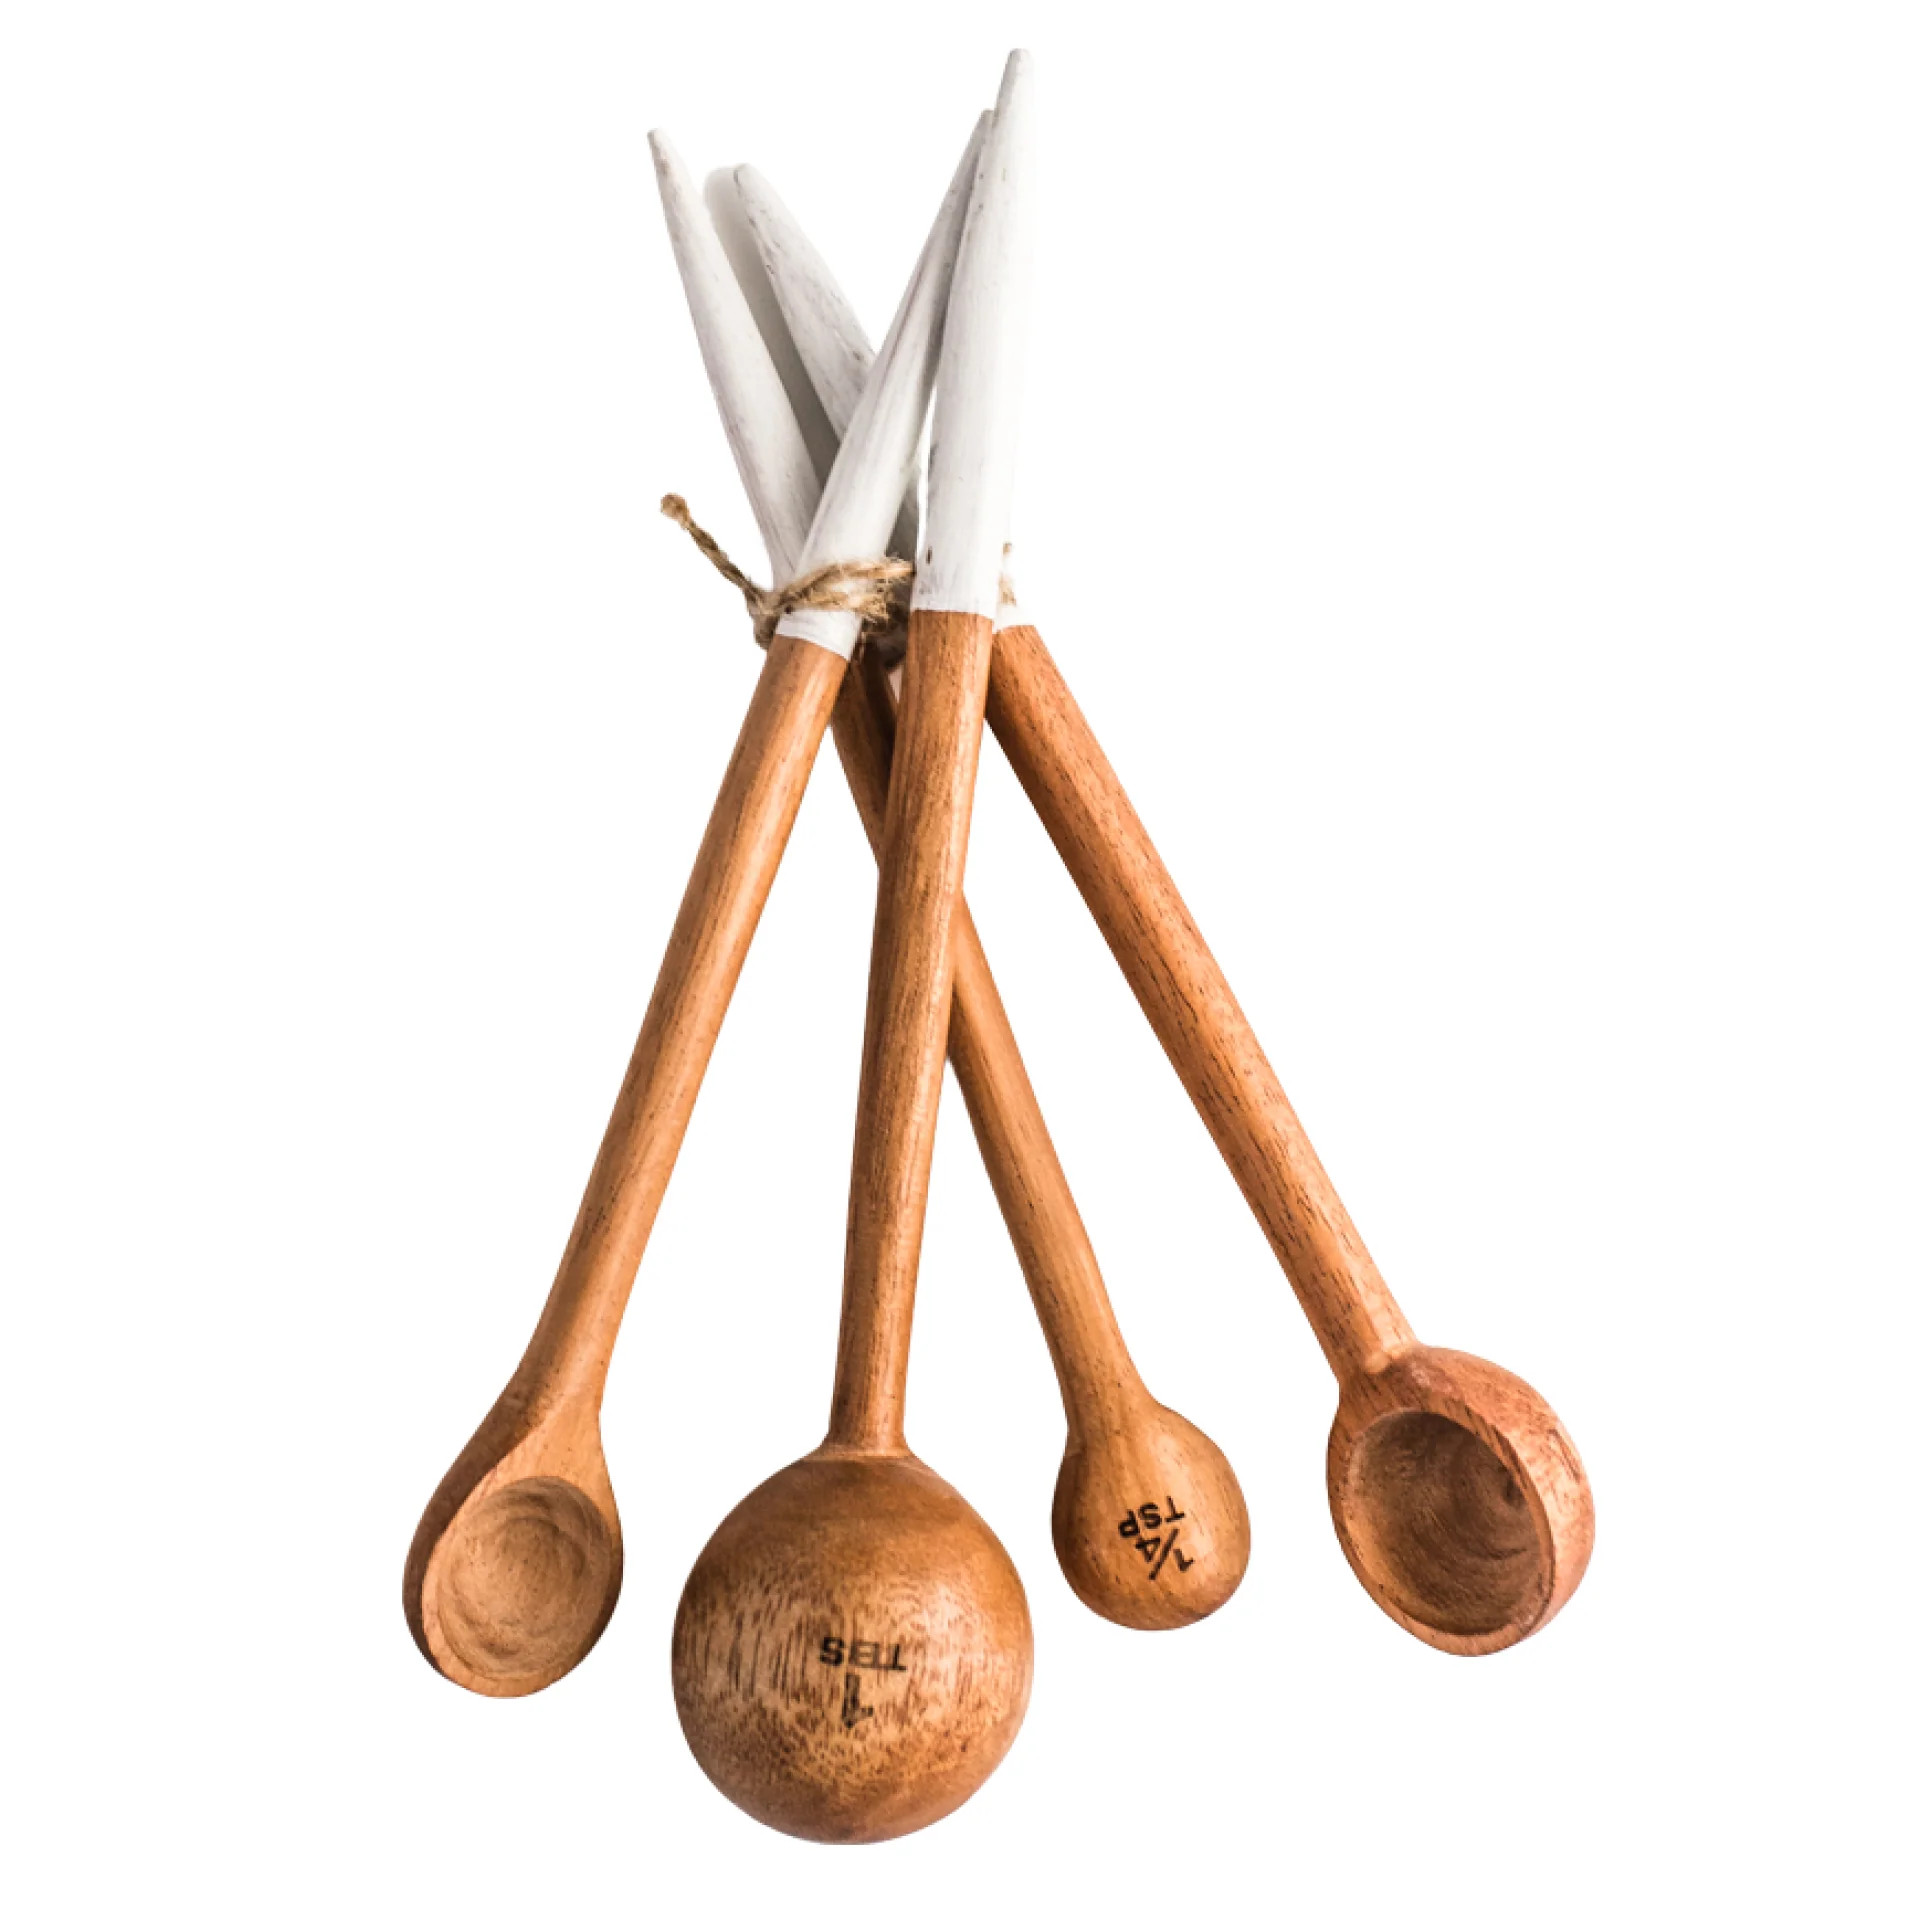 Handcarved Measuring spoon set - Cove Home | Cove Home